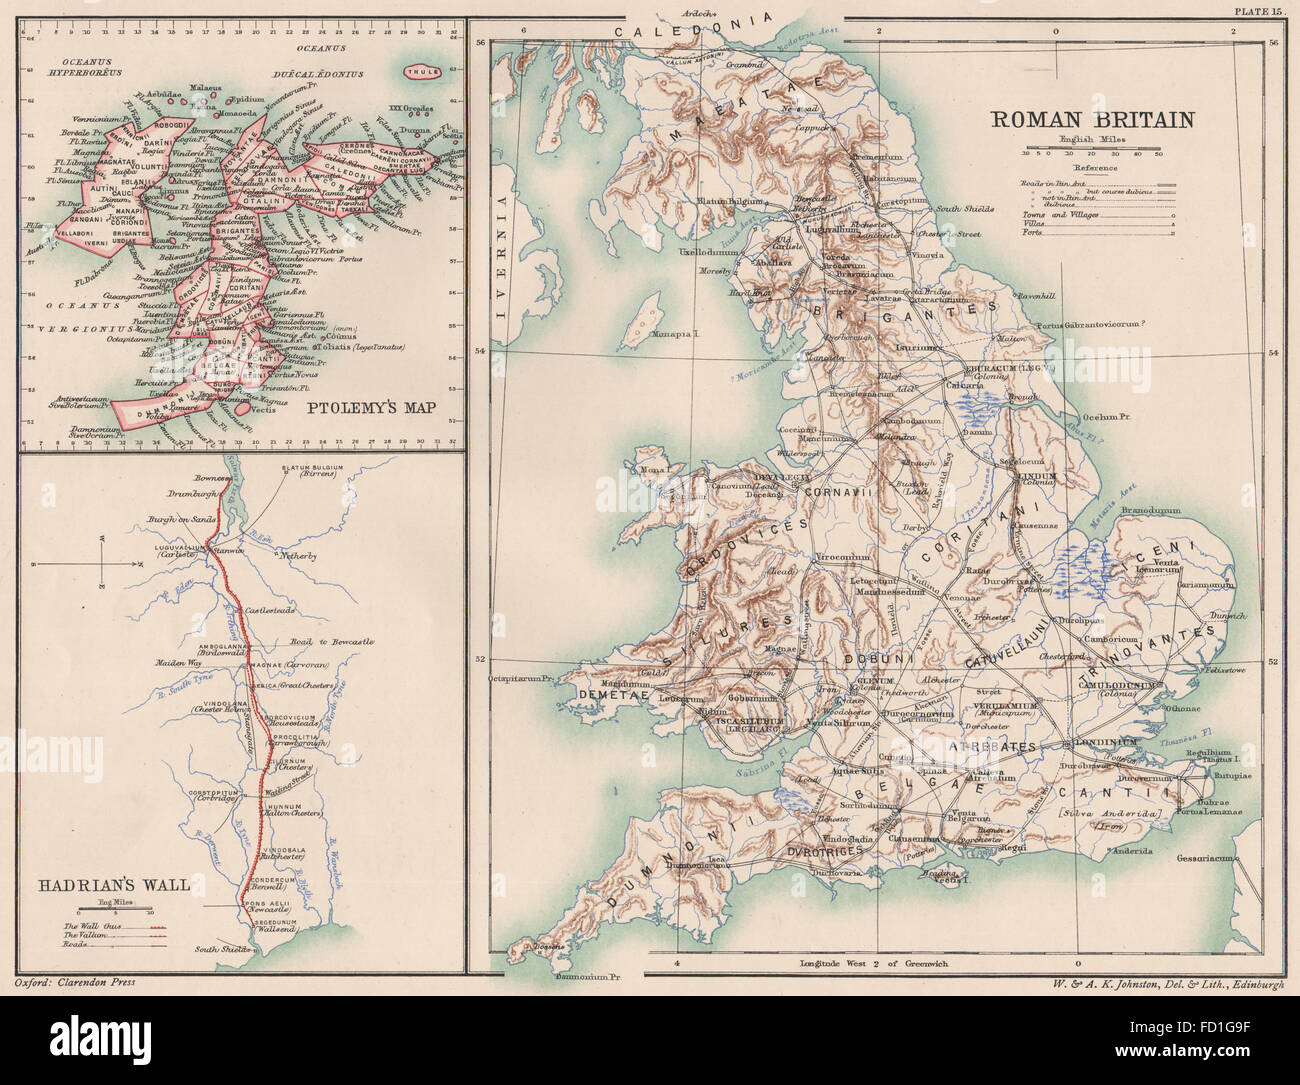 ROMAN BRITAIN: Roads towns forts villas. Ptolemy's map. Hadrian's Wall, 1902 Stock Photo